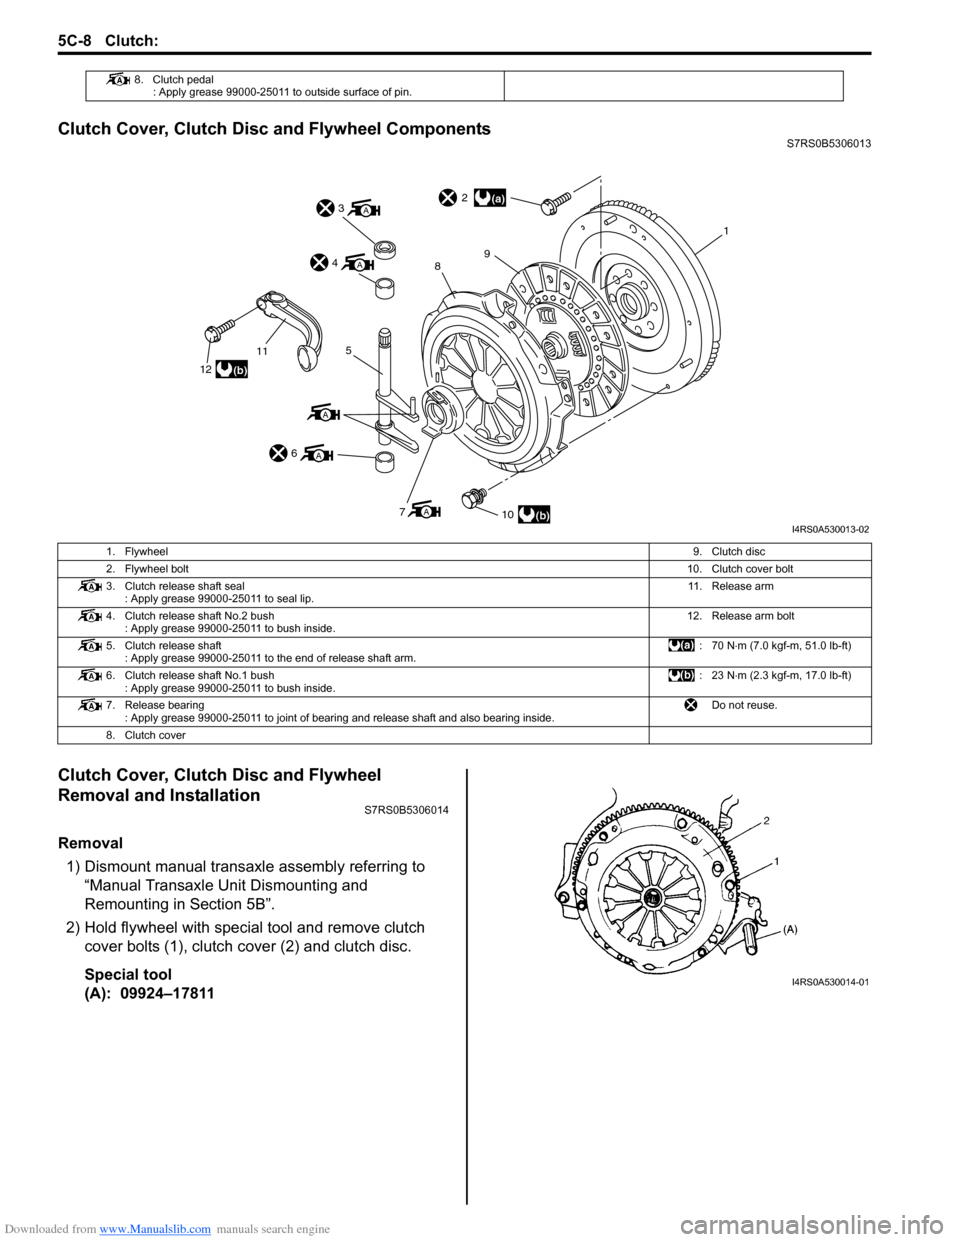 SUZUKI SWIFT 2007 2.G Service Workshop Manual Downloaded from www.Manualslib.com manuals search engine 5C-8 Clutch: 
Clutch Cover, Clutch Disc and Flywheel ComponentsS7RS0B5306013
Clutch Cover, Clutch Disc and Flywheel 
Removal and Installation
S